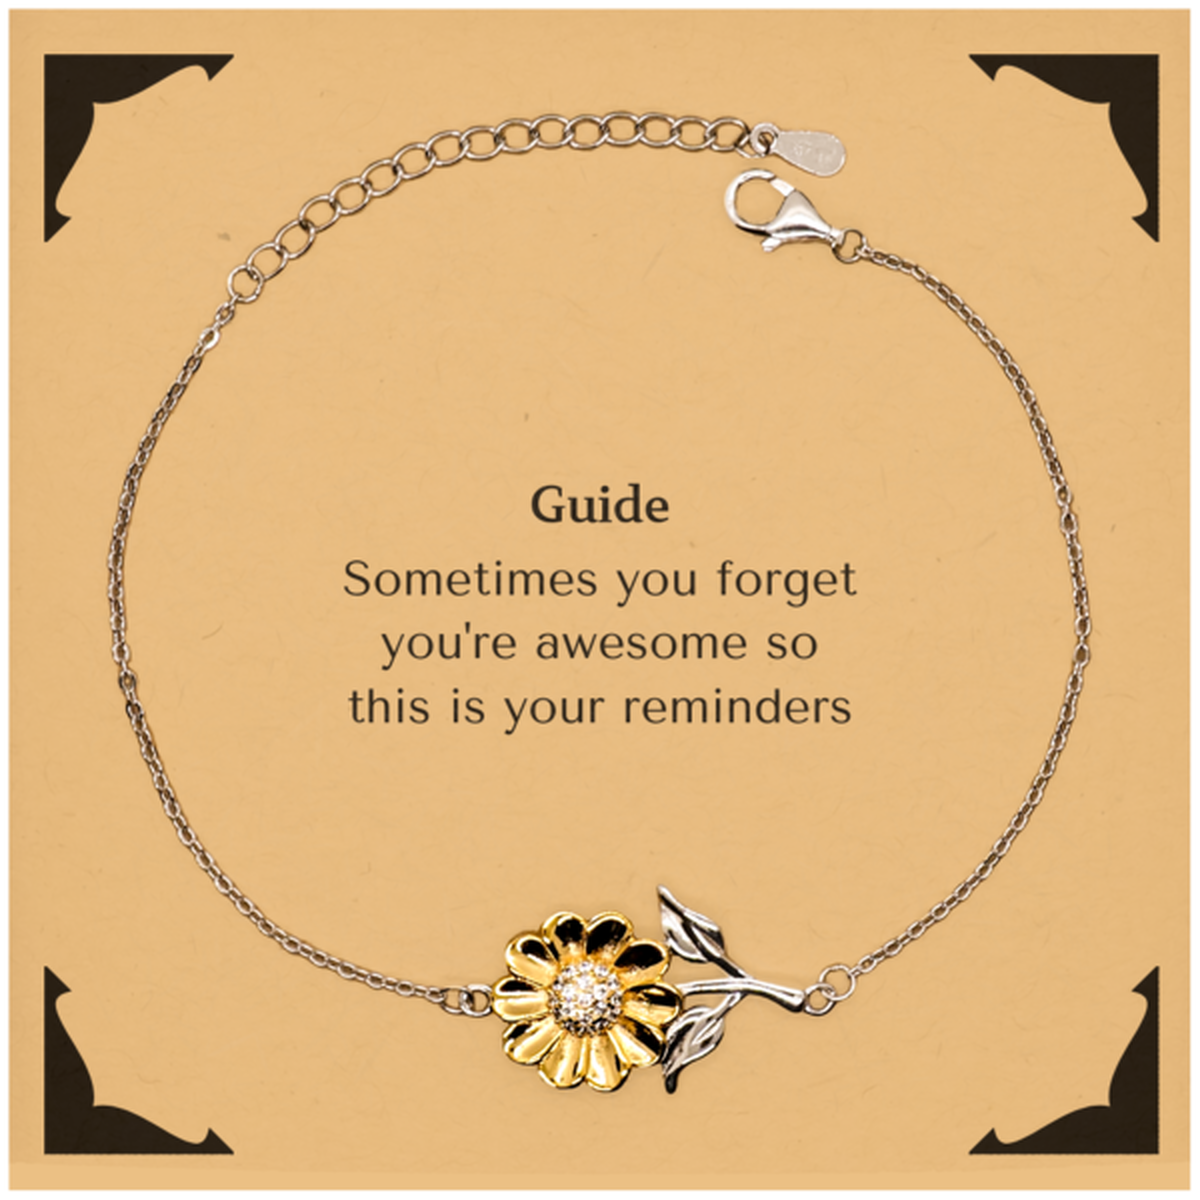 Sentimental Guide Sunflower Bracelet, Guide Sometimes you forget you're awesome so this is your reminders, Graduation Christmas Birthday Gifts for Guide, Men, Women, Coworkers